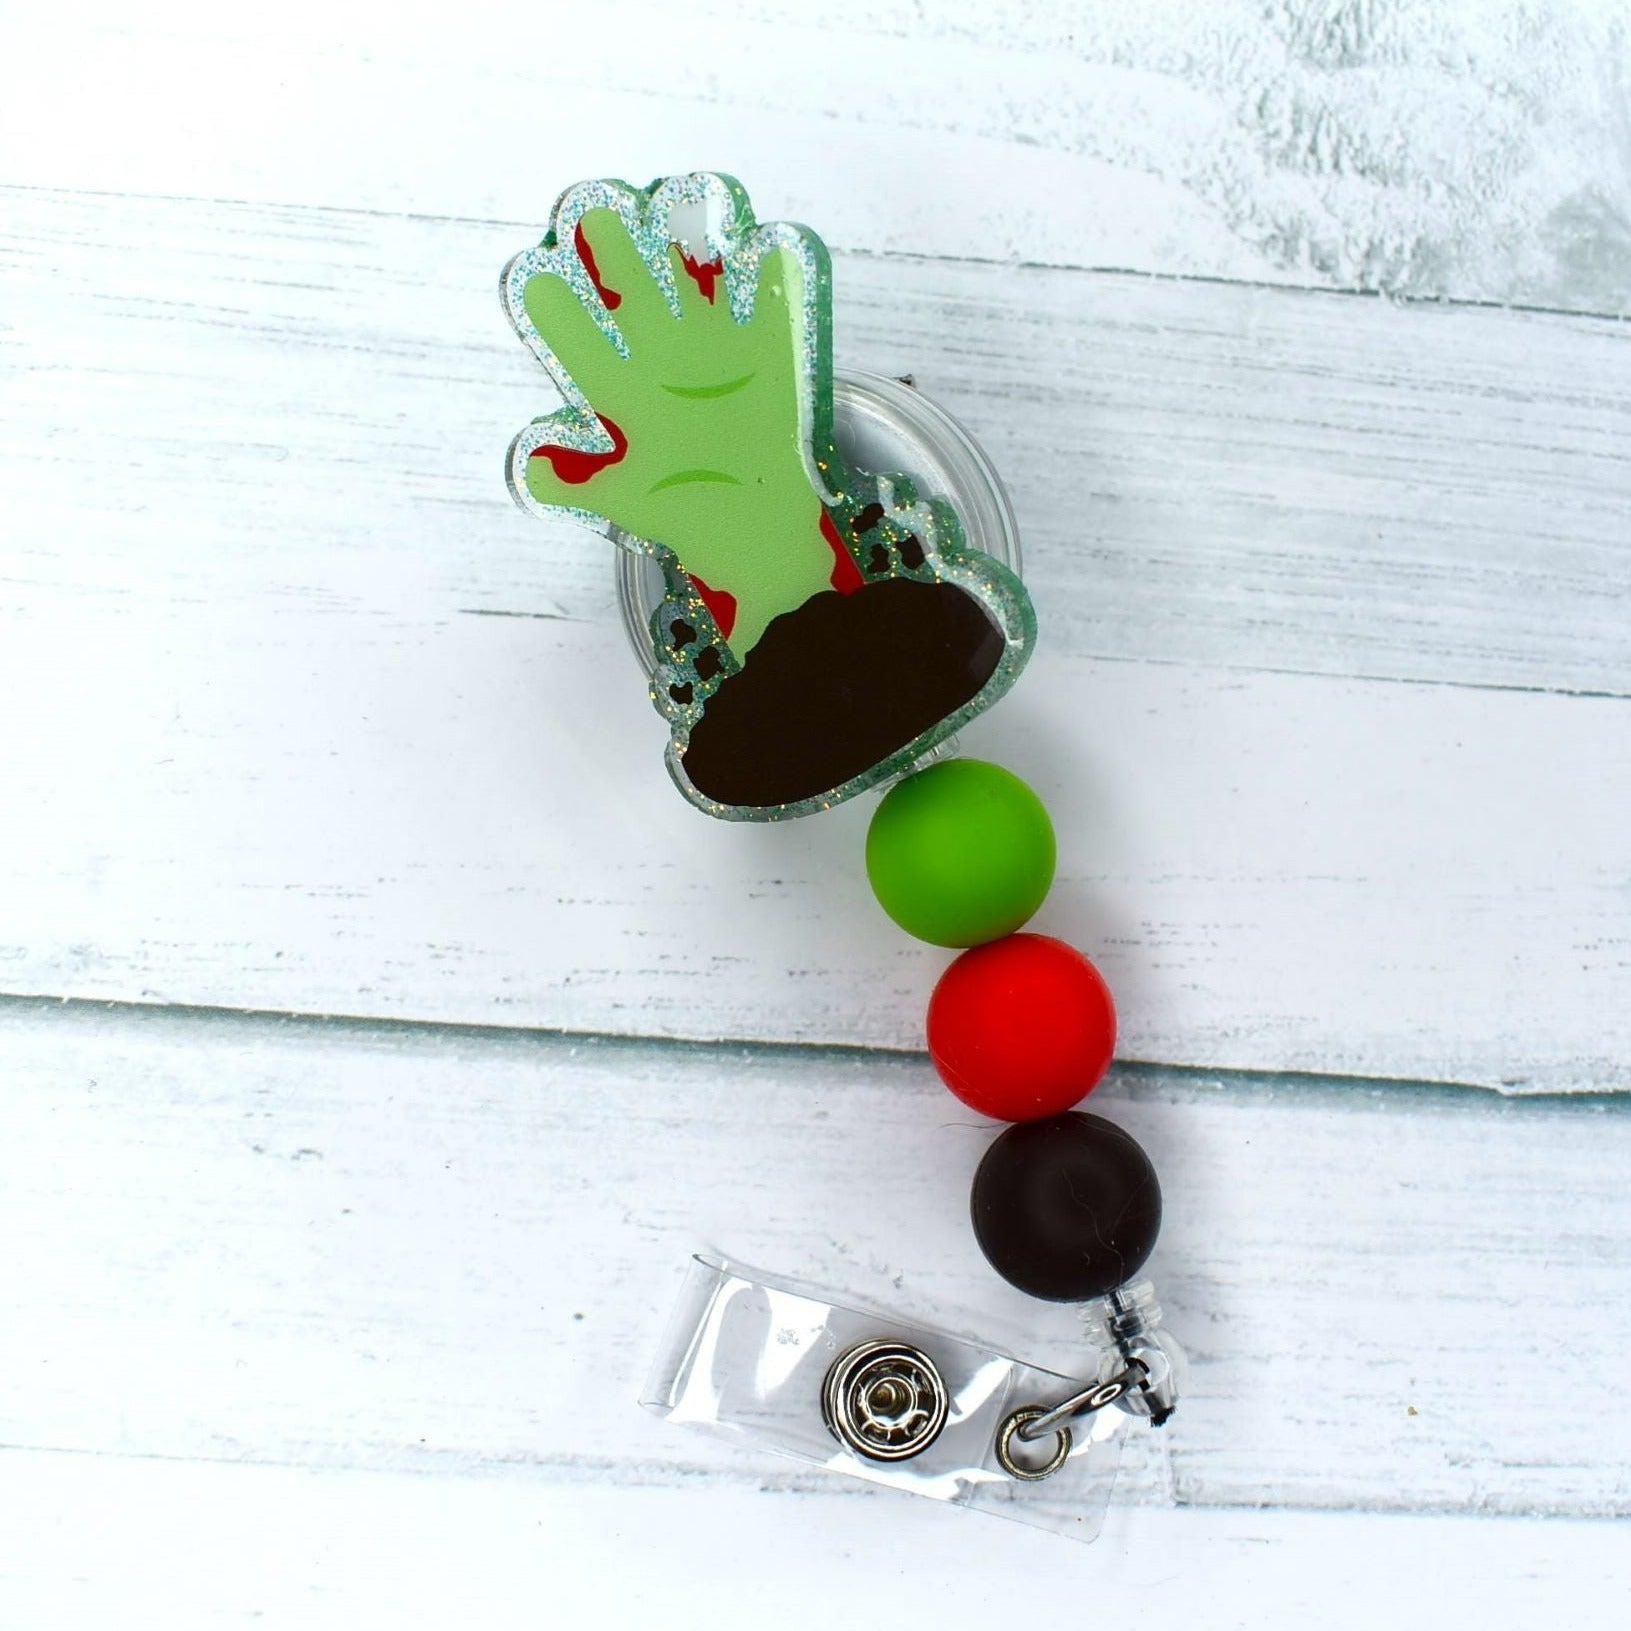 An undead arm rises from the soil, featured on this acrylic badge reel designed to evoke the feeling of a post-apocalyptic world. The accessory is finished off with green, red, and brown silicone beads.